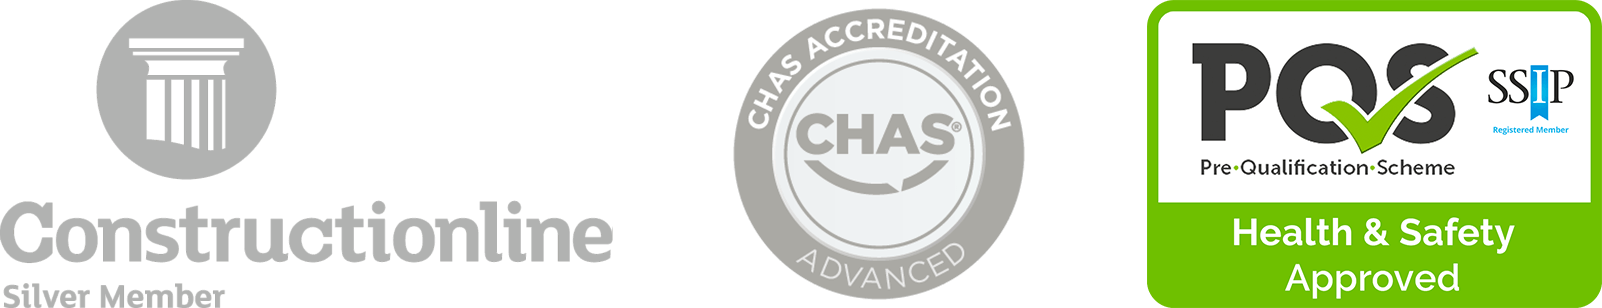 Accredited contractor